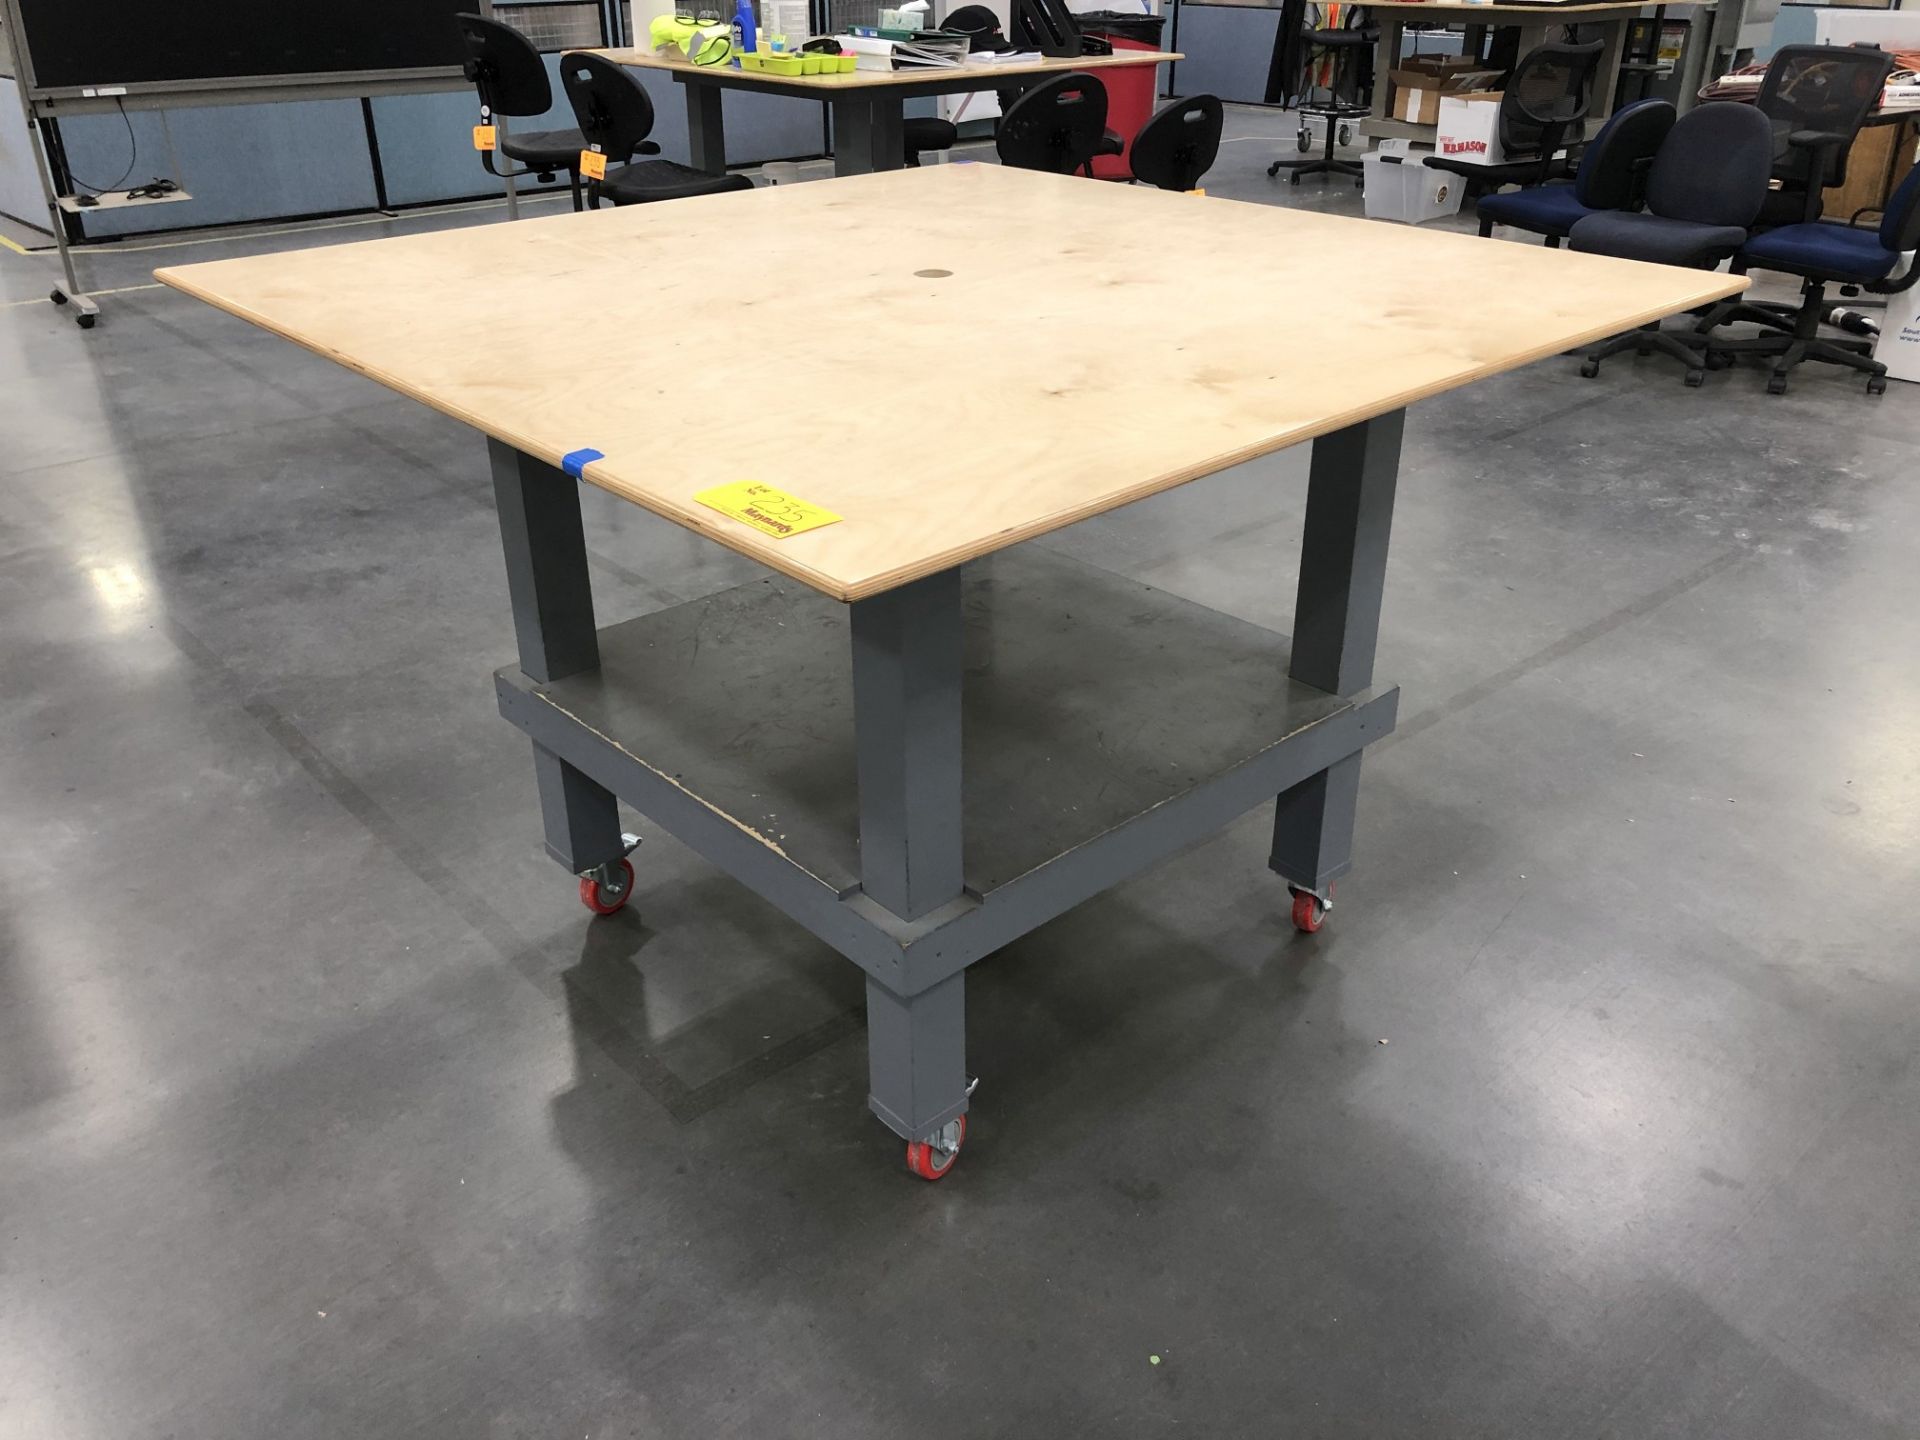 4' x 4' 42" High Wood Top Table on Casters - Image 3 of 3